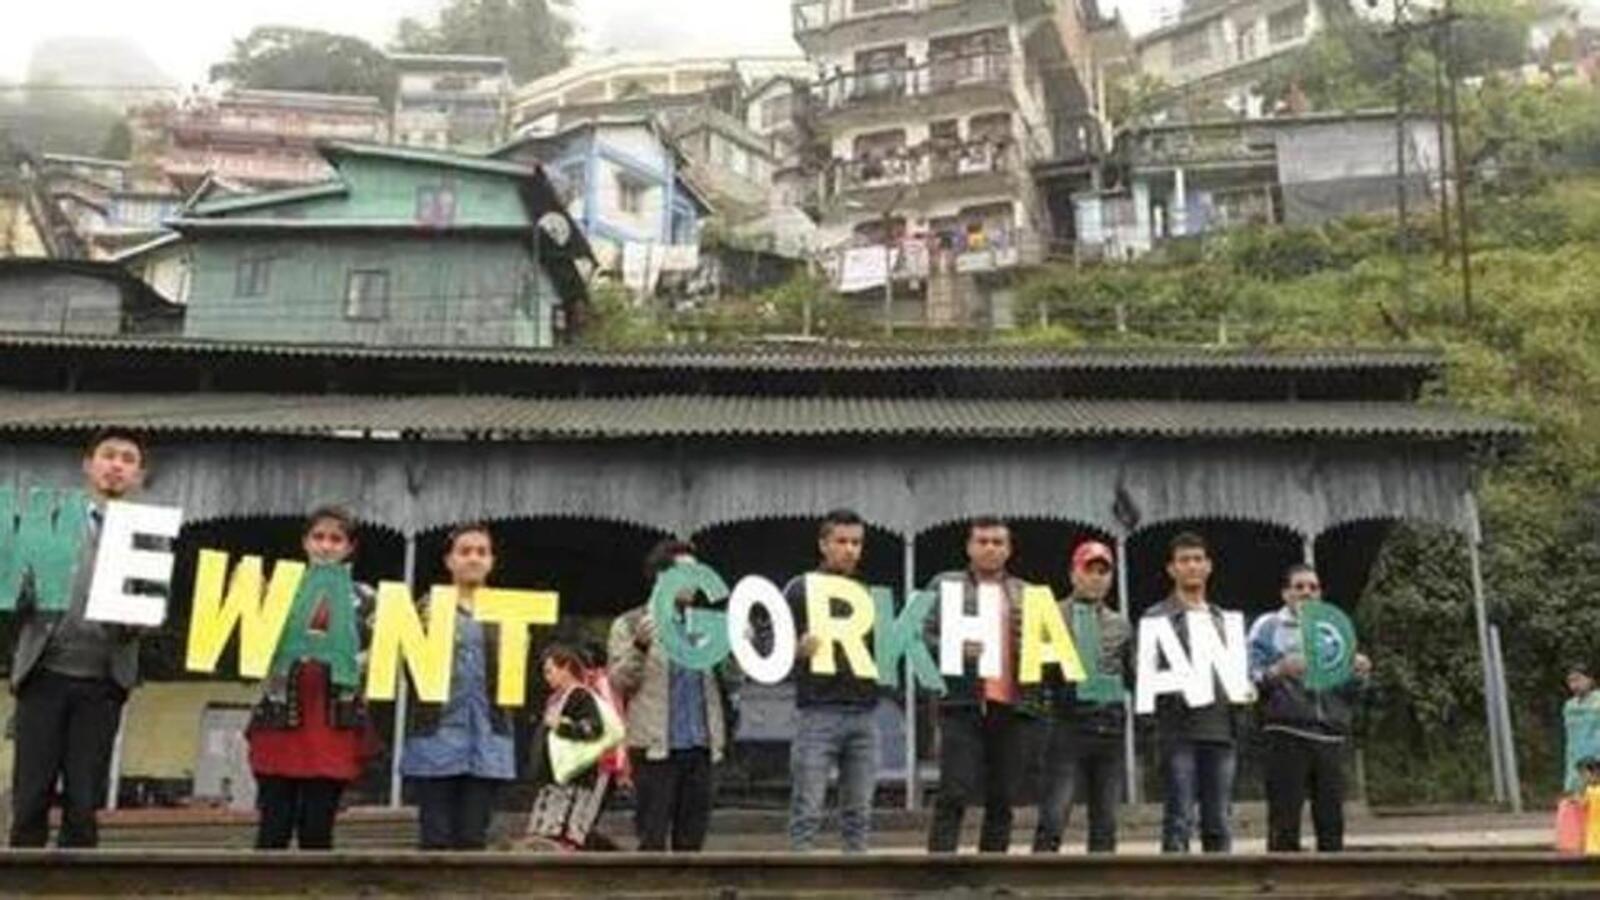 GJM withdraws from GTA agreement, voices demand for Gorkhaland